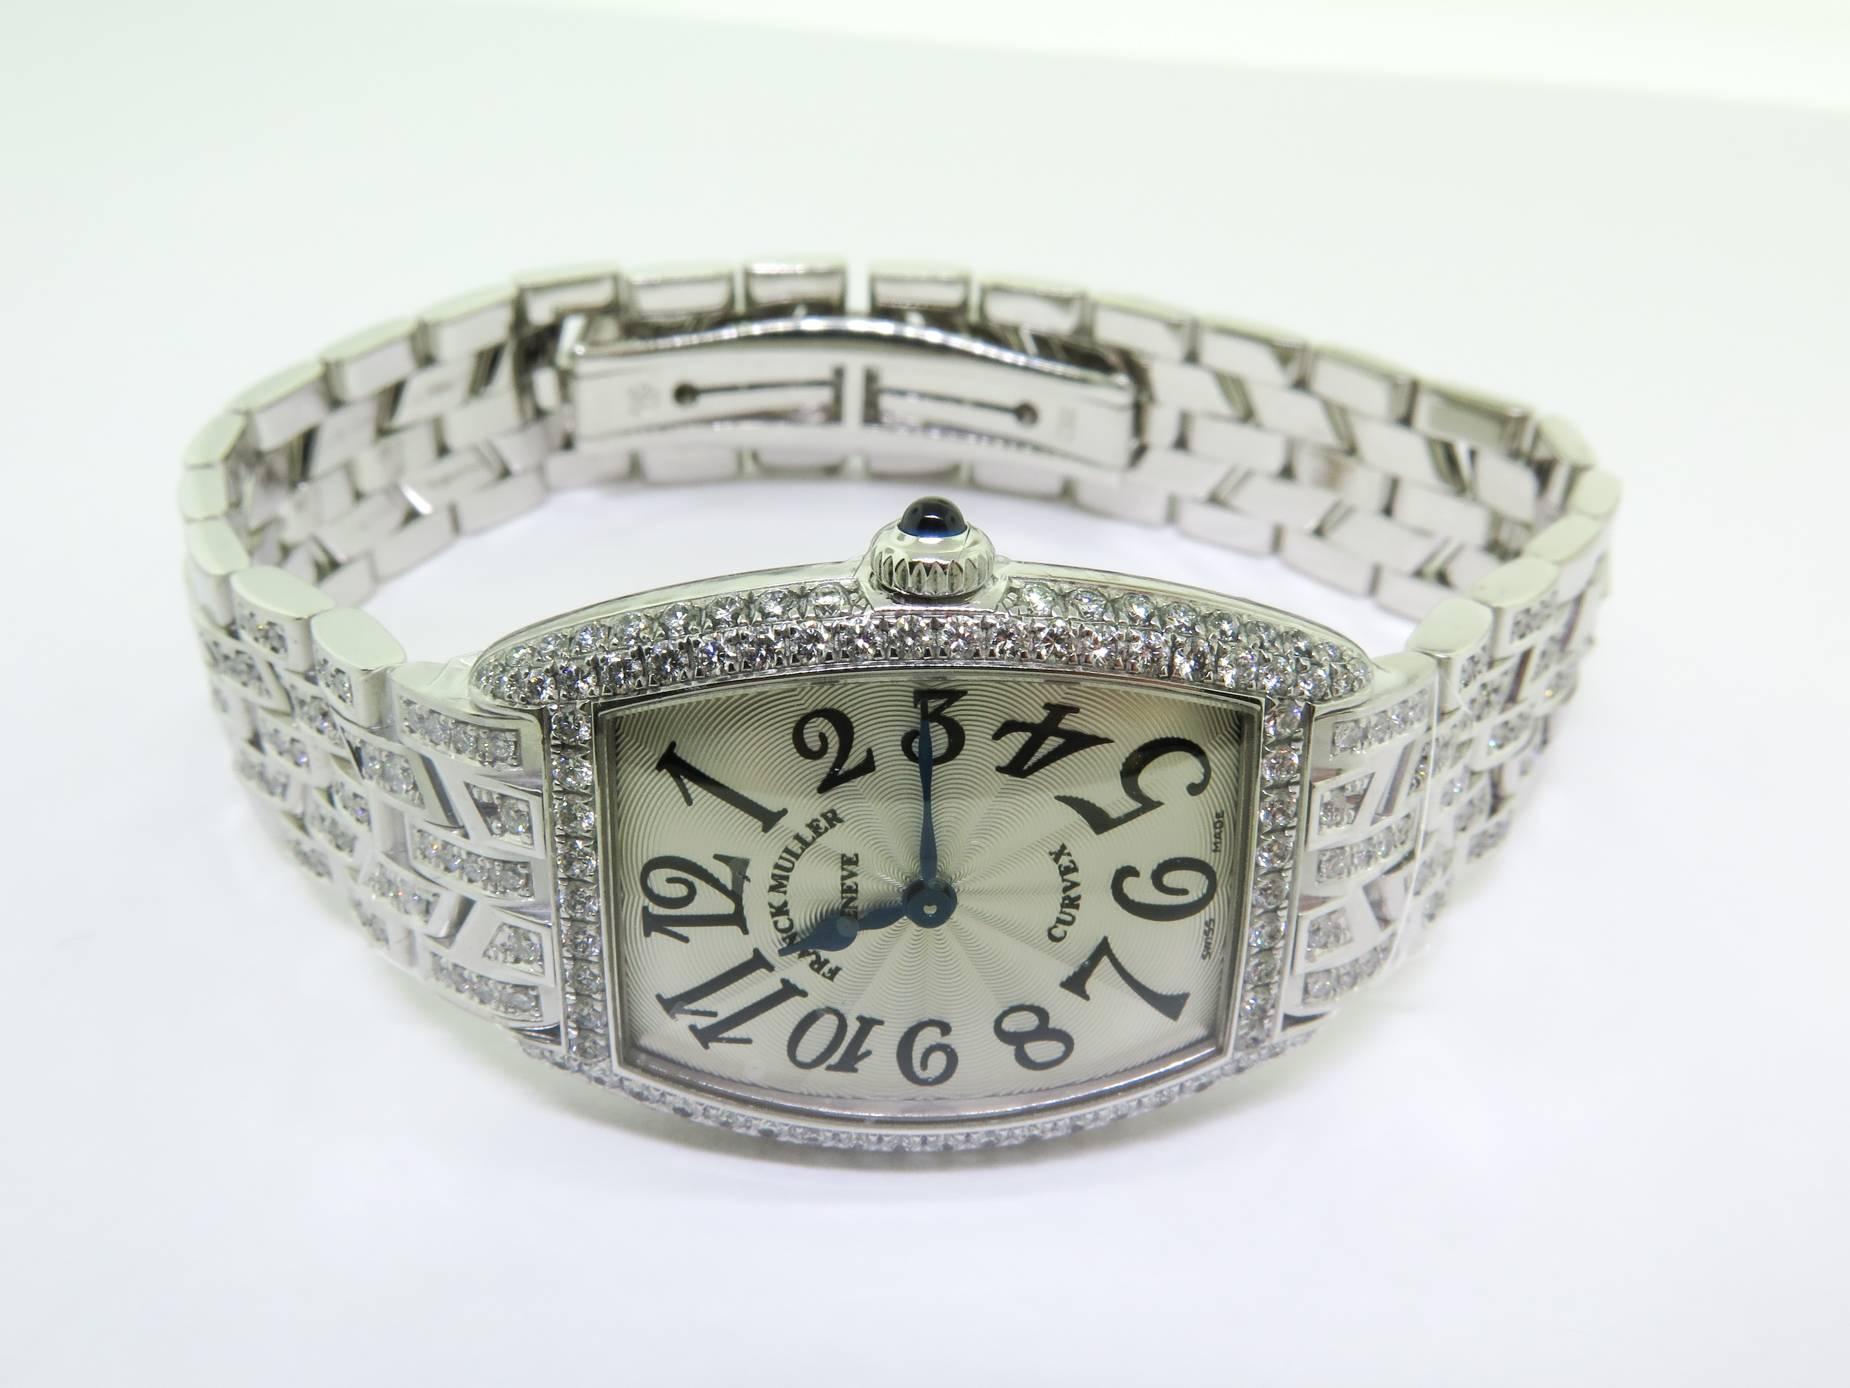 Brand new Franck Muller Cintree Curvex, Model # 1752 QZ D 18k White Gold 25mm x 35mm carefully set with diamonds. Silver dial with Arabic hour markers and blue hands. 18k White Gold bezel set with round cut diamonds. 18k White Gold crown set with